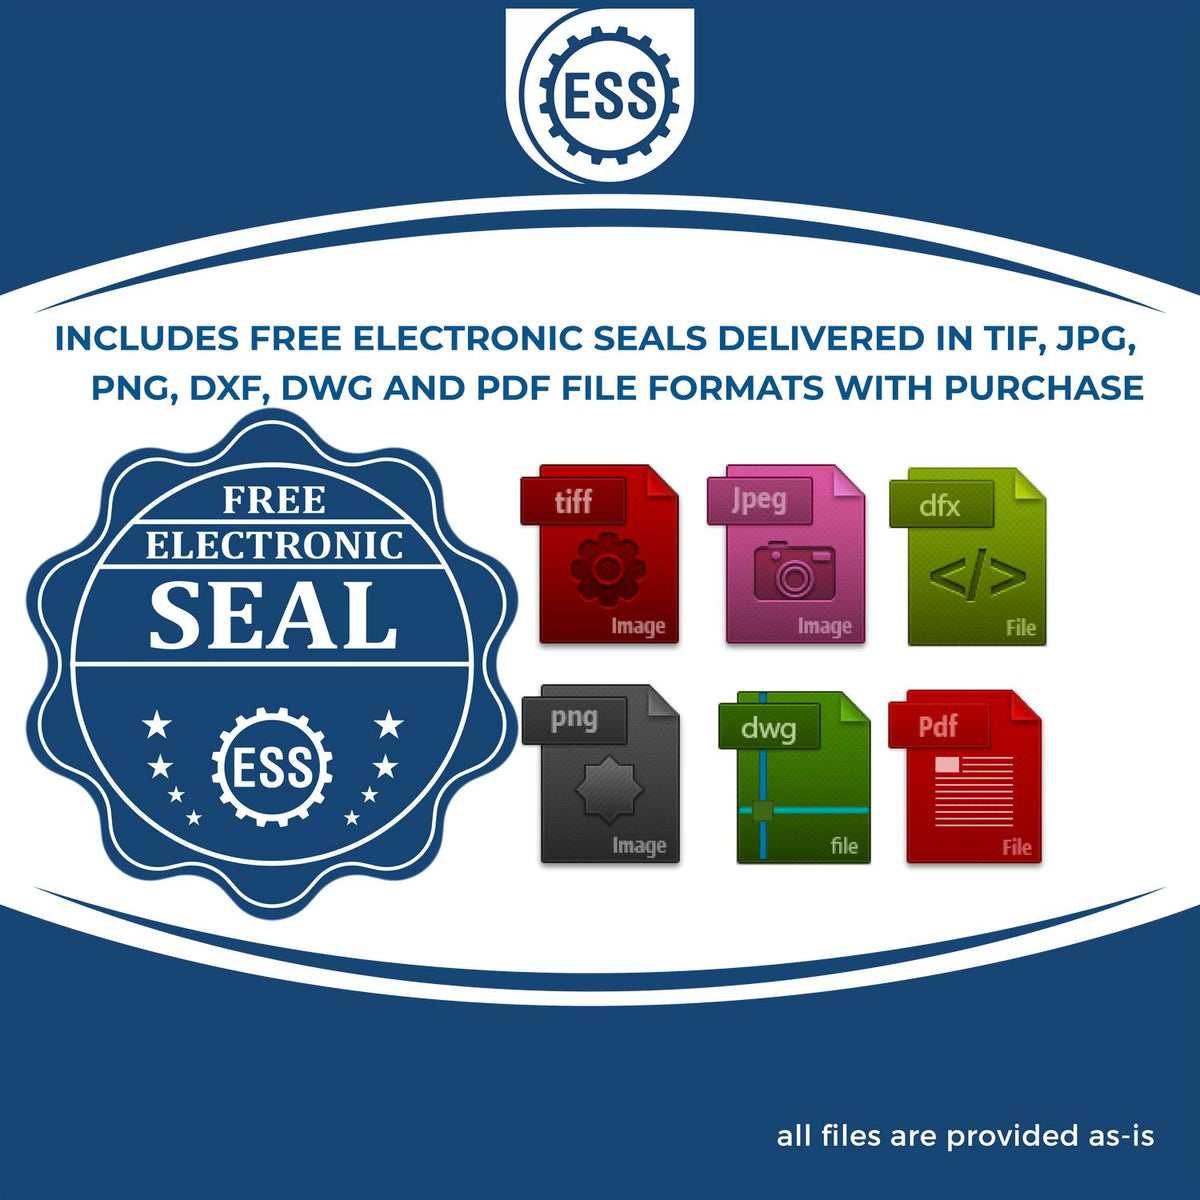 An infographic for the free electronic seal for the Handheld Missouri Land Surveyor Seal illustrating the different file type icons such as DXF, DWG, TIF, JPG and PNG.